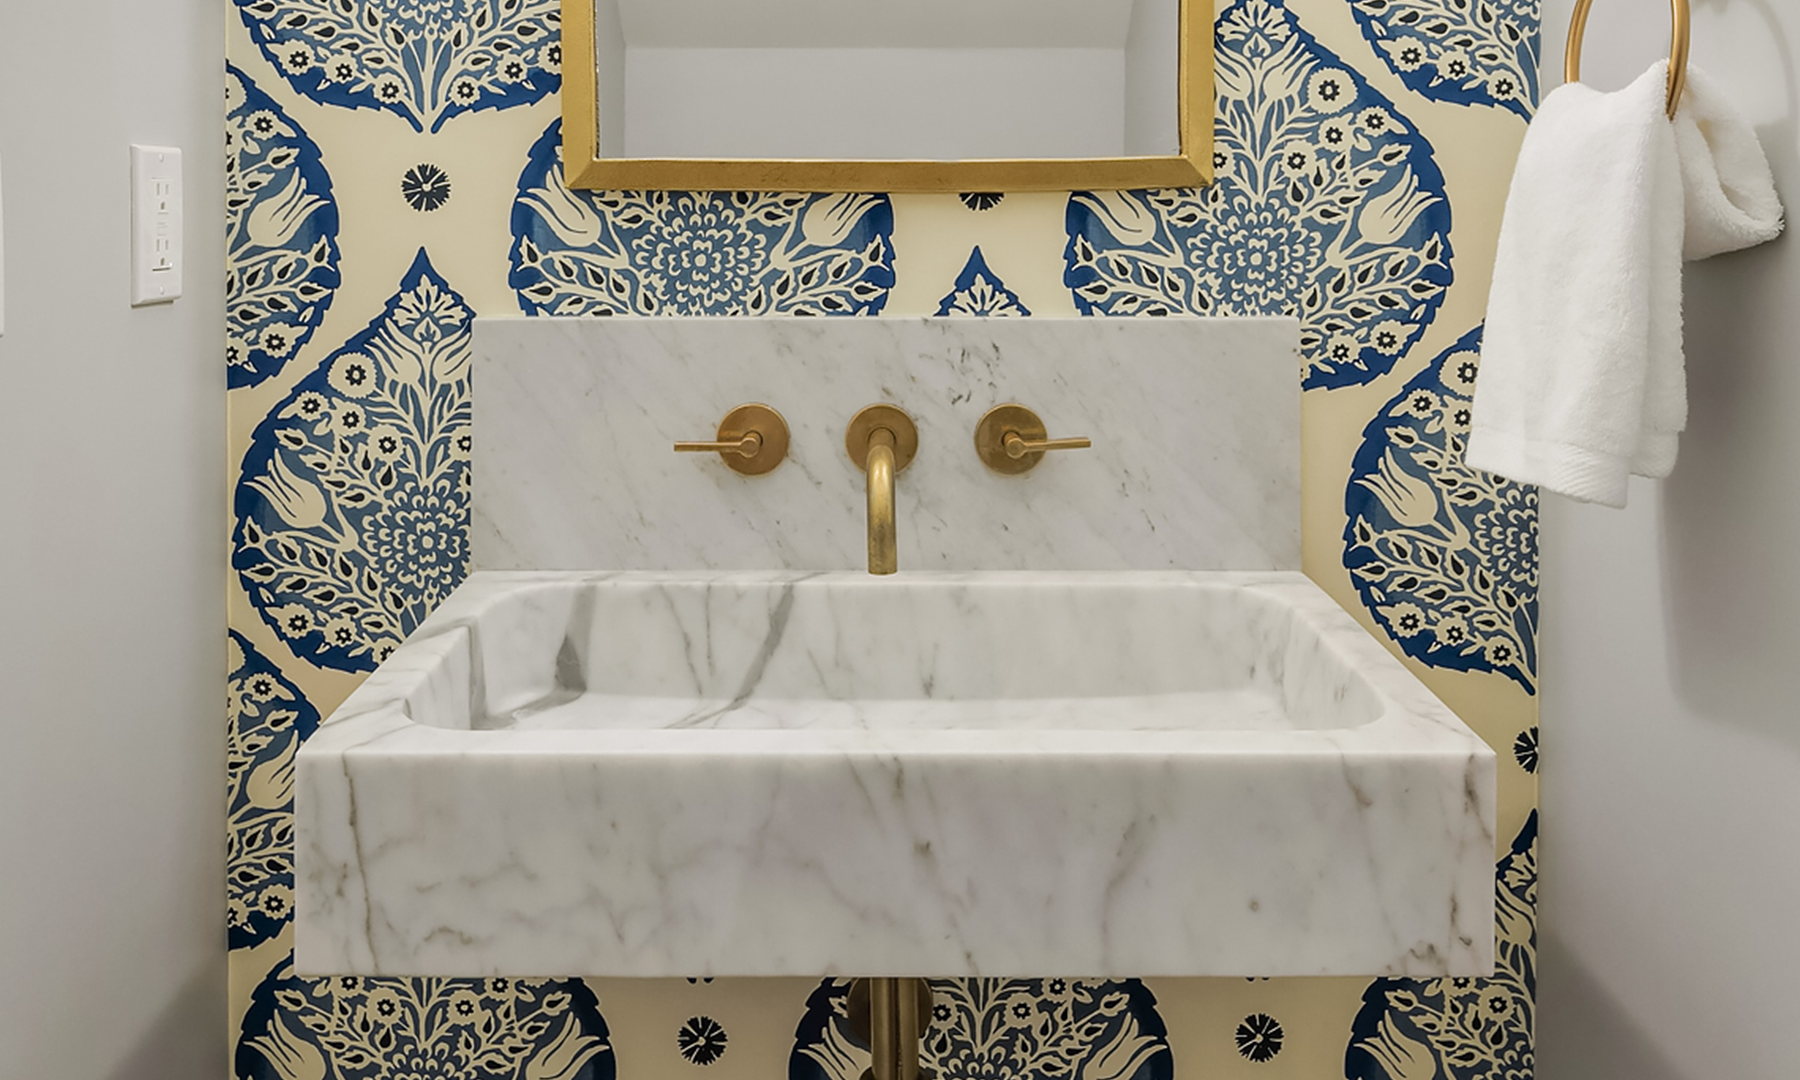 Marble wall mounted sink with satin bronze faucet and floral wallpaper